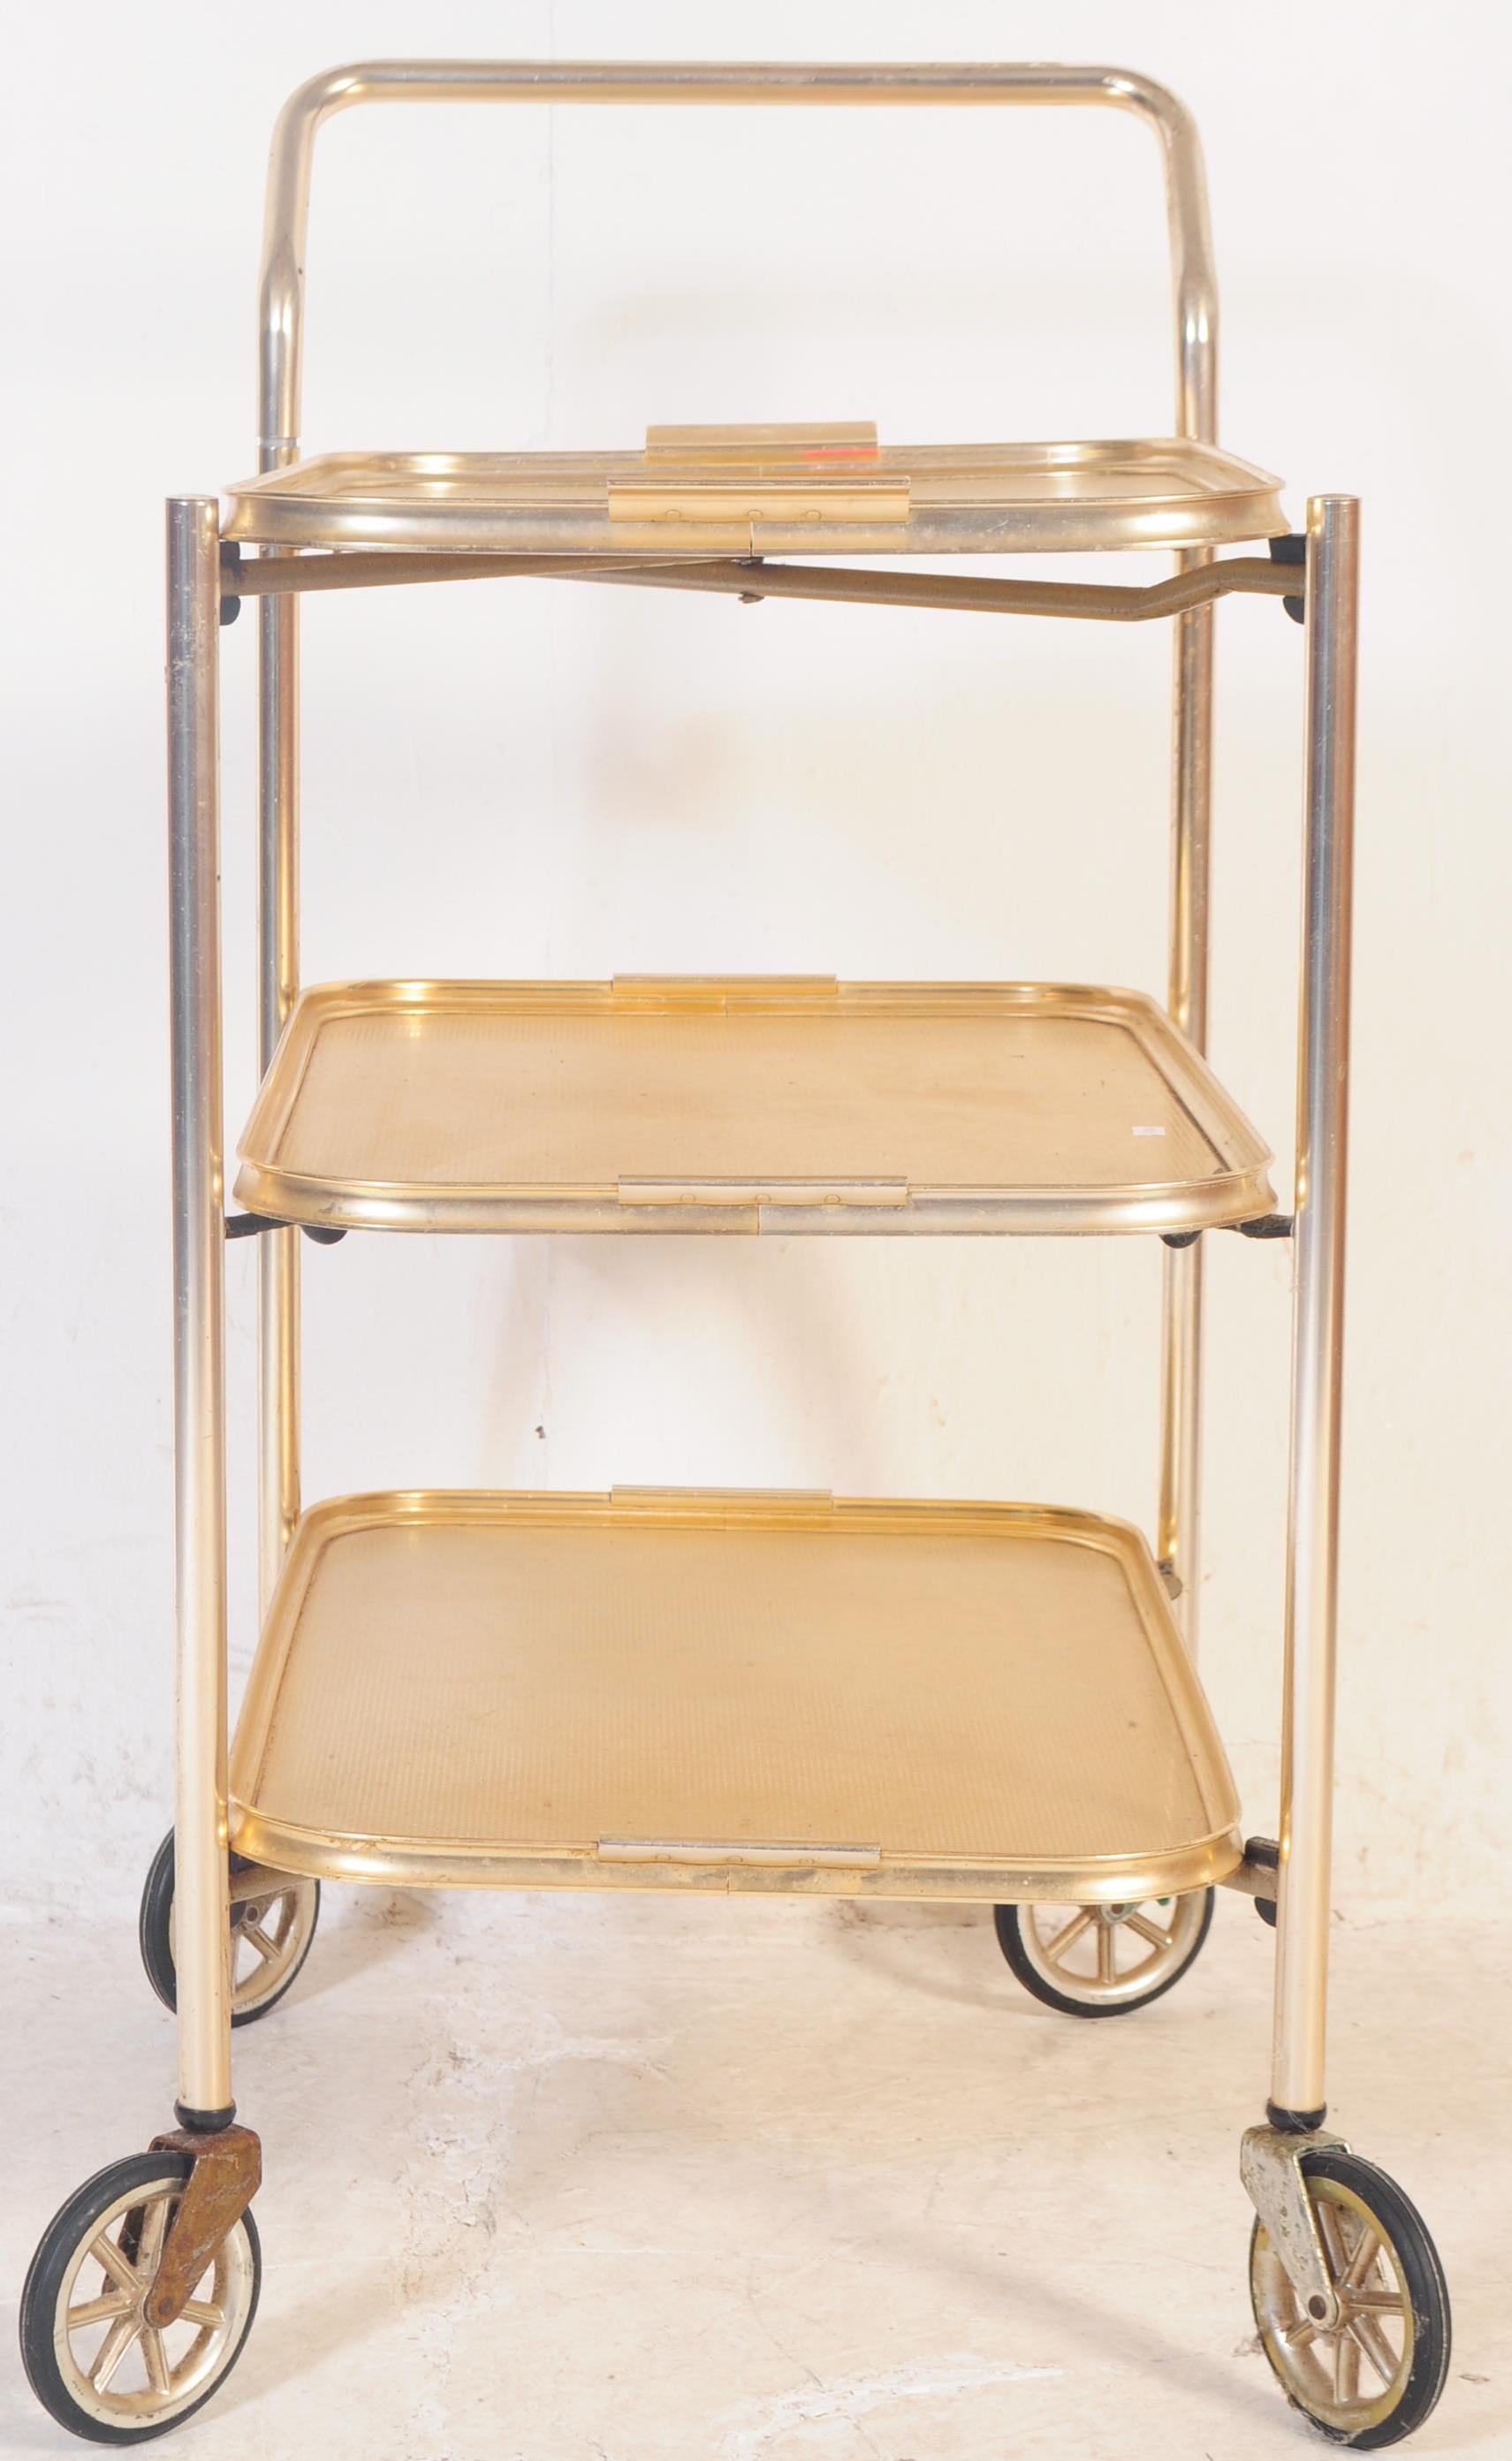 RETRO MID 20TH CENTURY THREE TIER SERVING COCKTAIL TROLLEY - Image 2 of 3